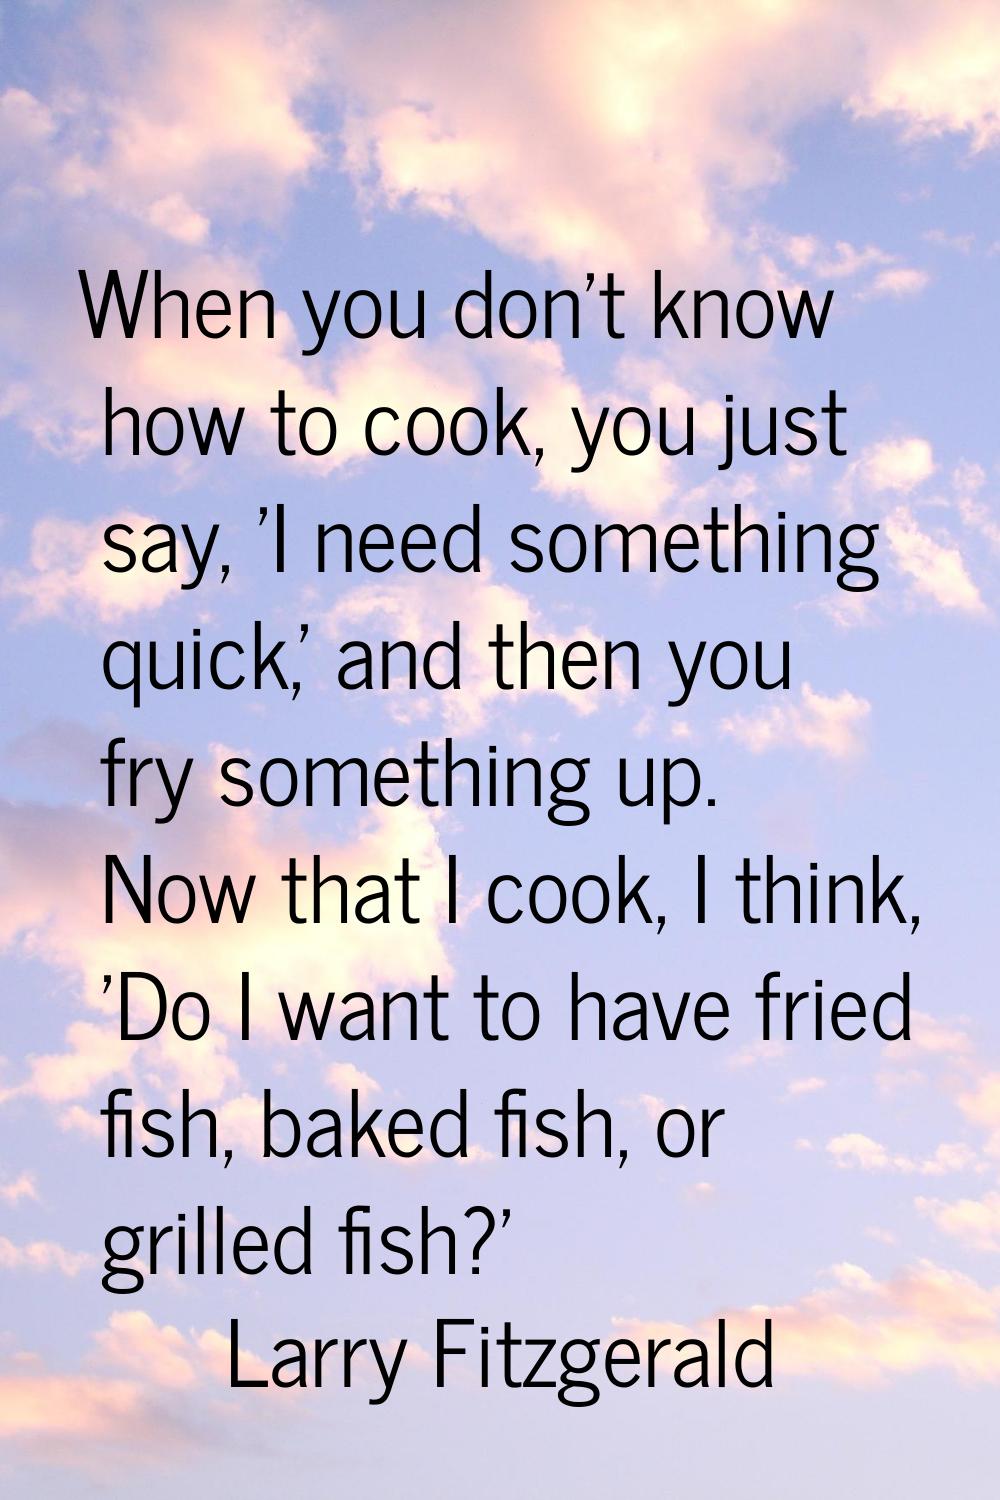 When you don't know how to cook, you just say, 'I need something quick,' and then you fry something